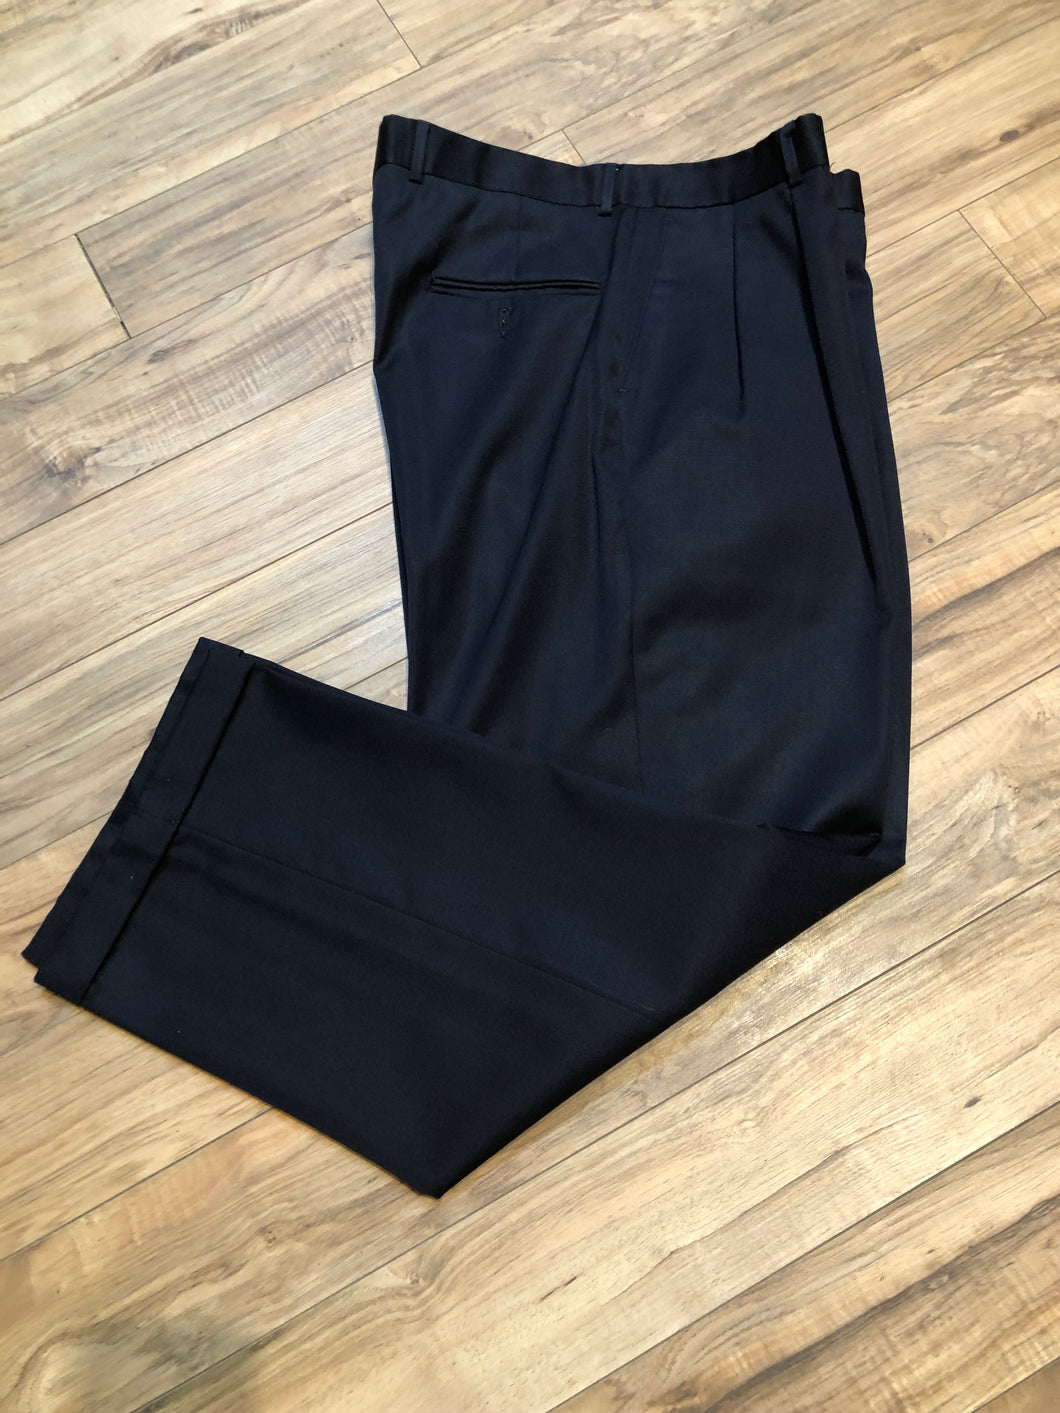 Kingspier Vintage - Vintage wool blend (fibres unknown) trousers with zip fly, straight leg, mid rise and front and back pockets,

Size 36.